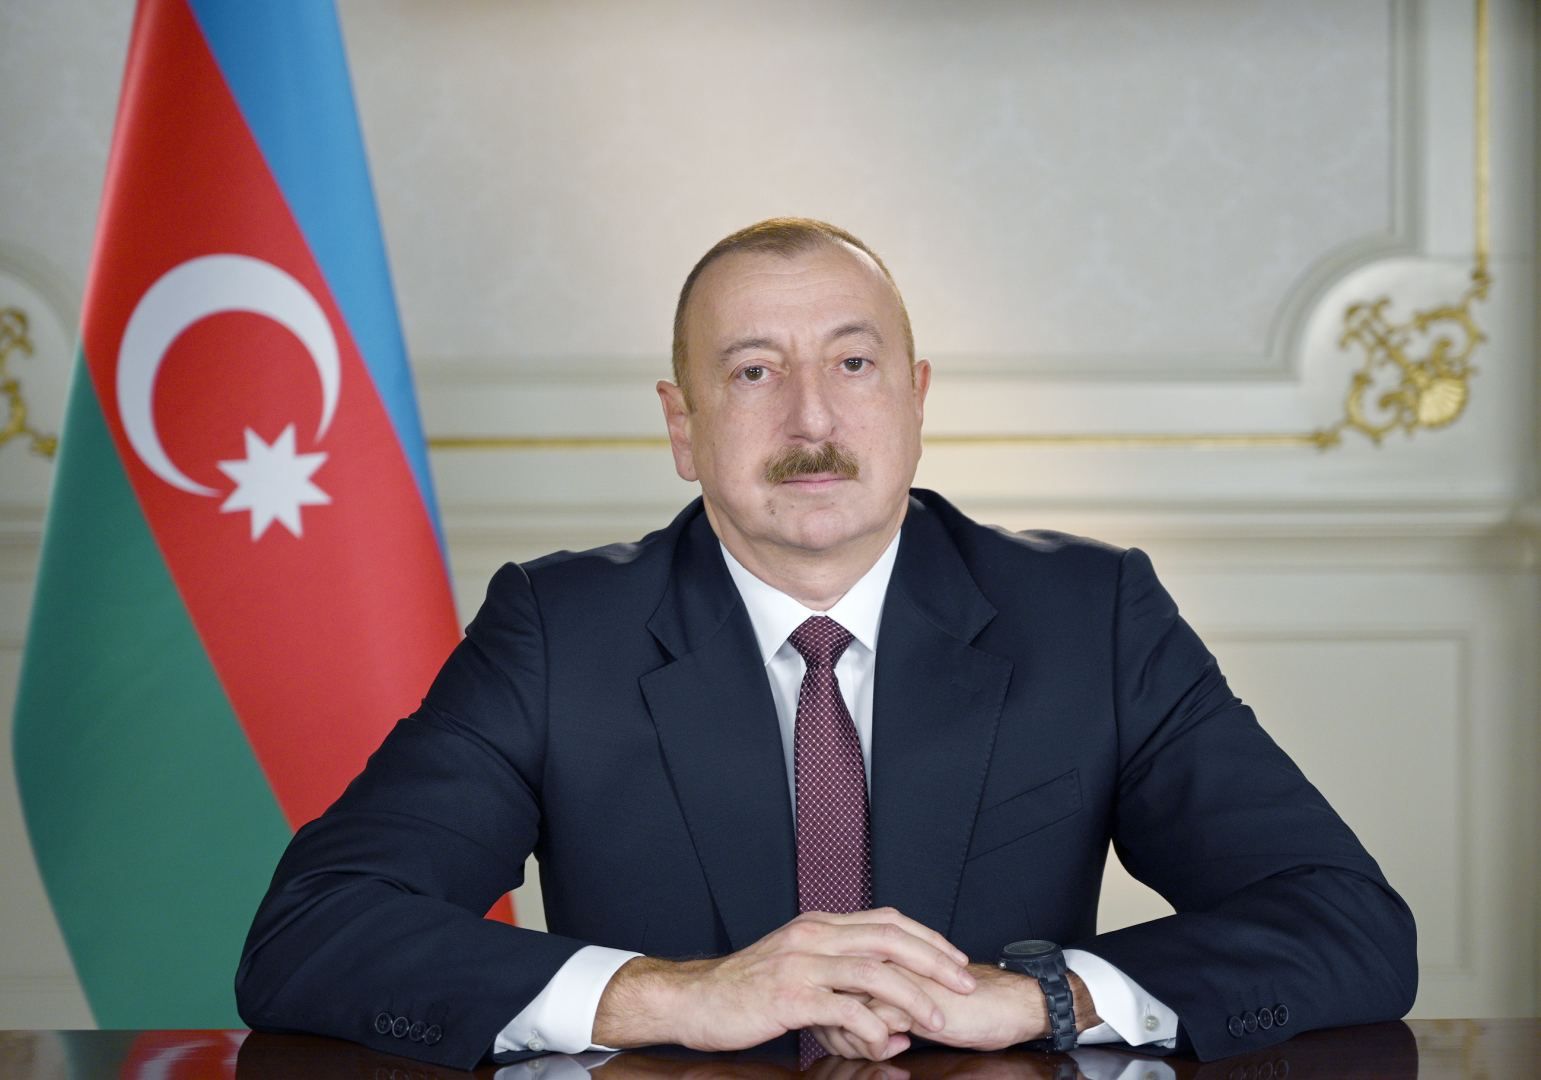 Azerbaijani President sends congratulatory letter to King of Jordan on Independence Day